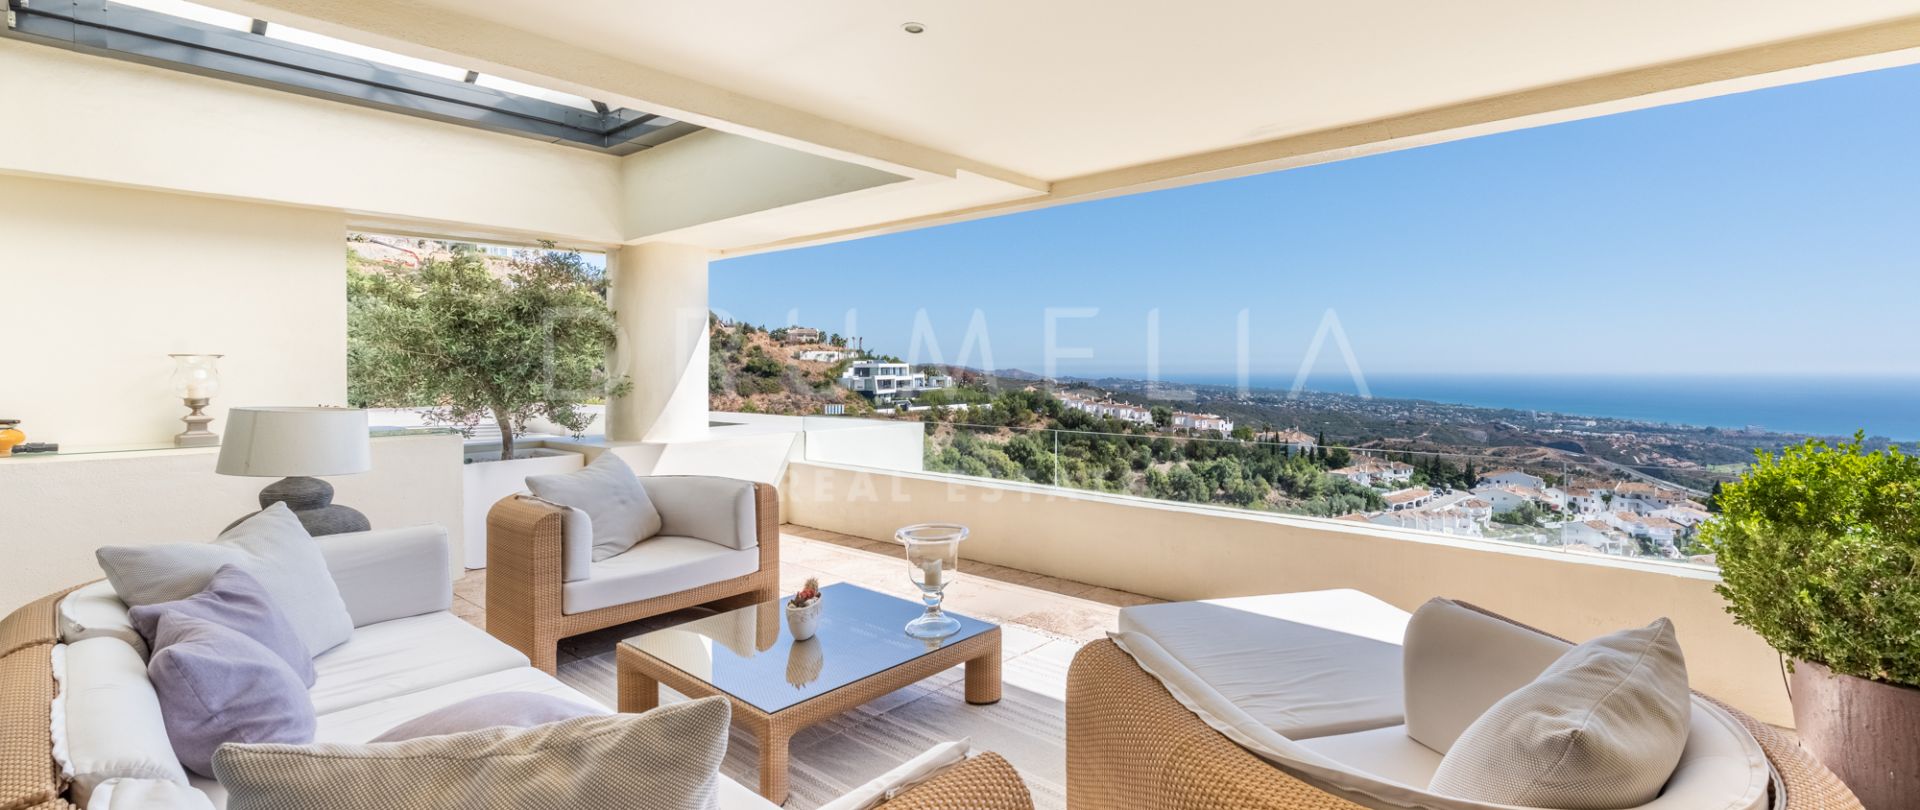 Luxury Duplex Penthouse with Panoramic Sea Views in Los Monteros Hill Club, Marbella East